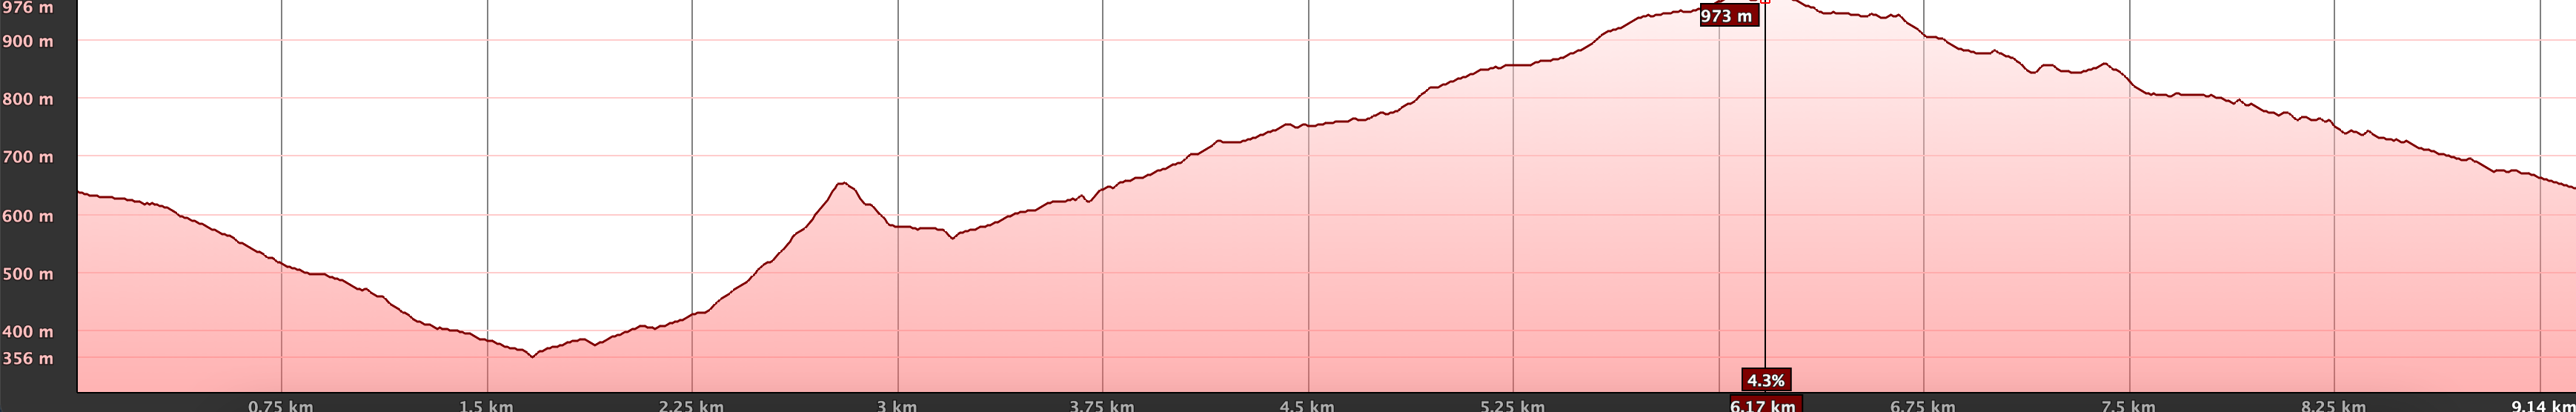 Elevation profile of the Los Carrizales hike